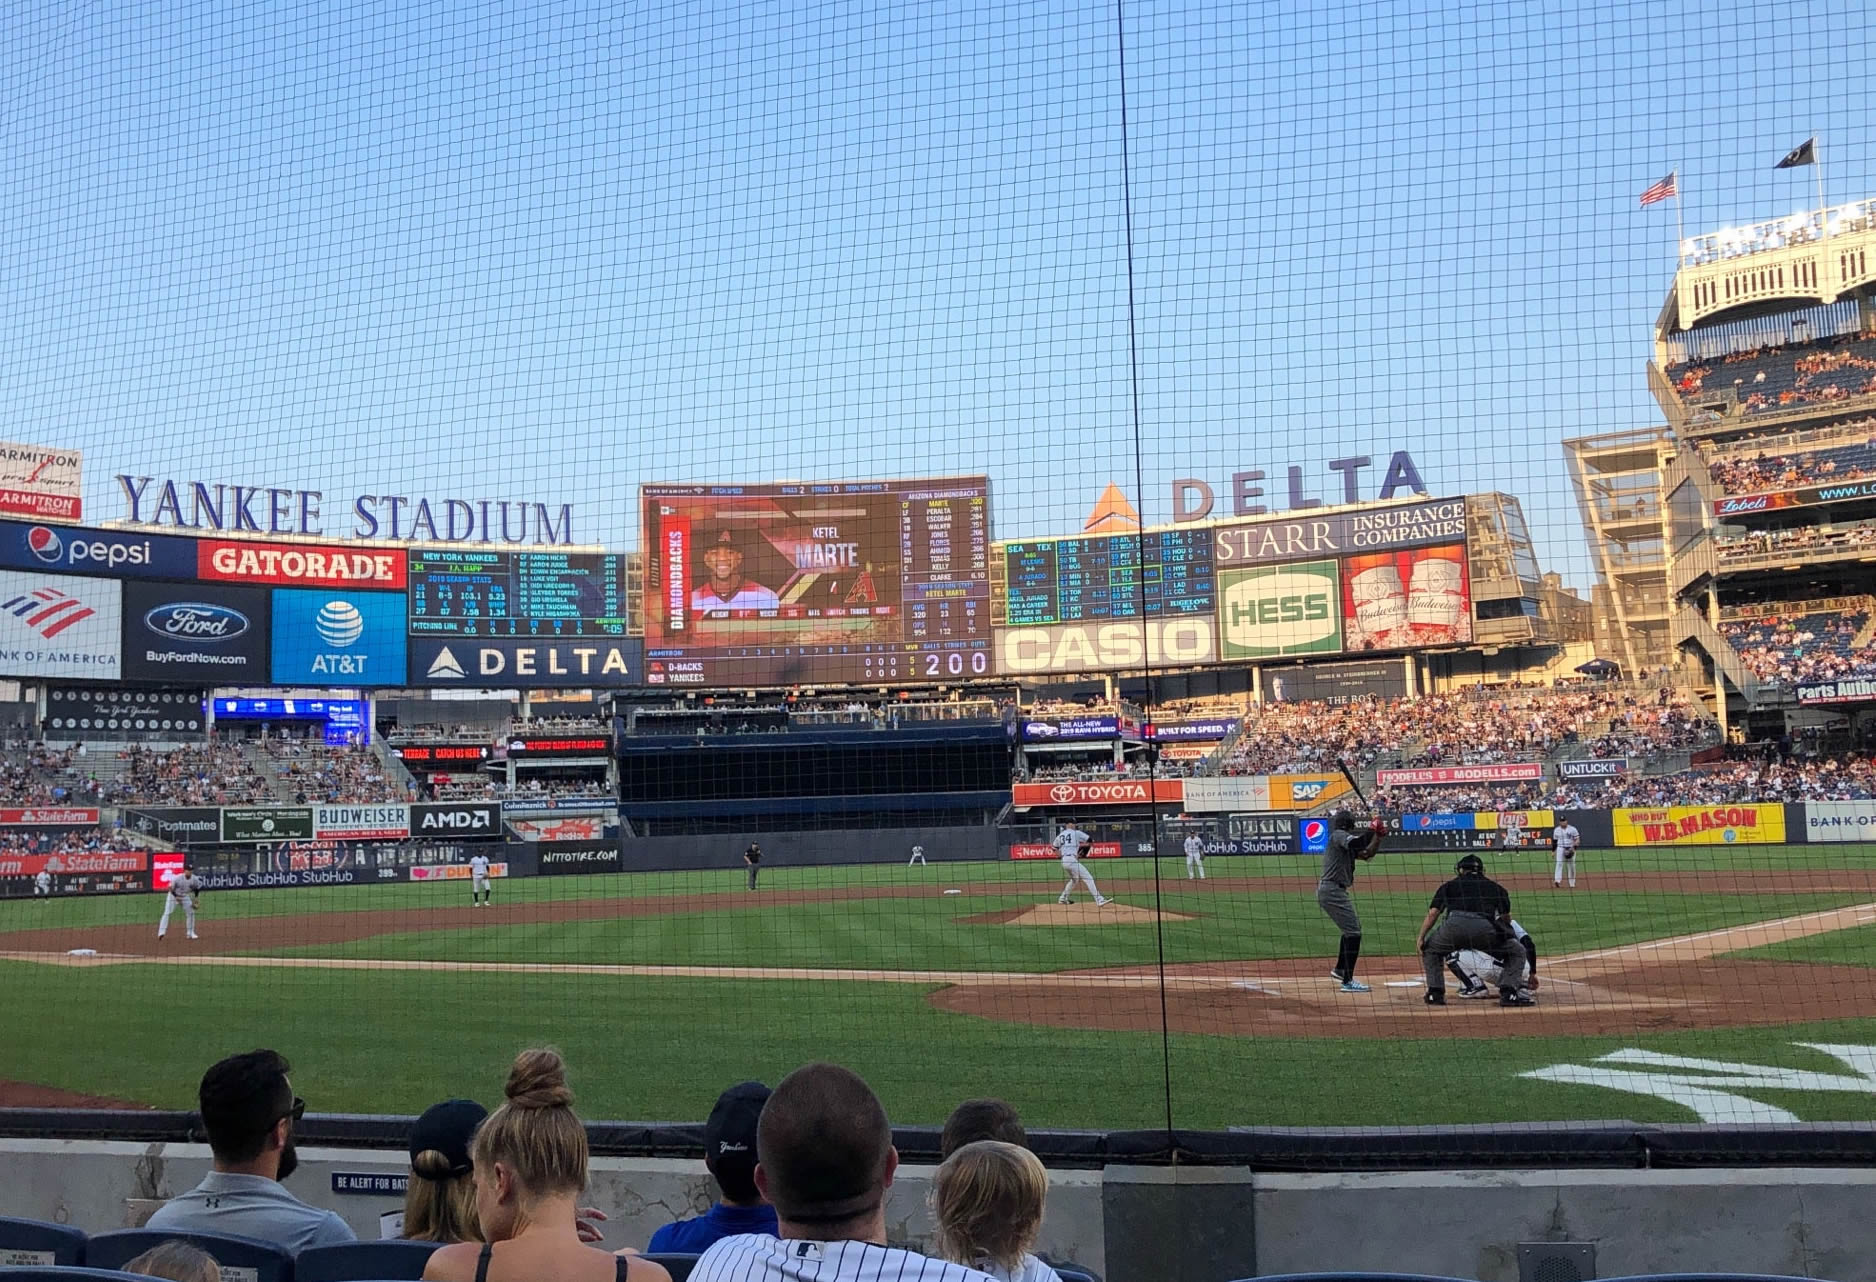 section 21a, row 4 seat view  for baseball - yankee stadium